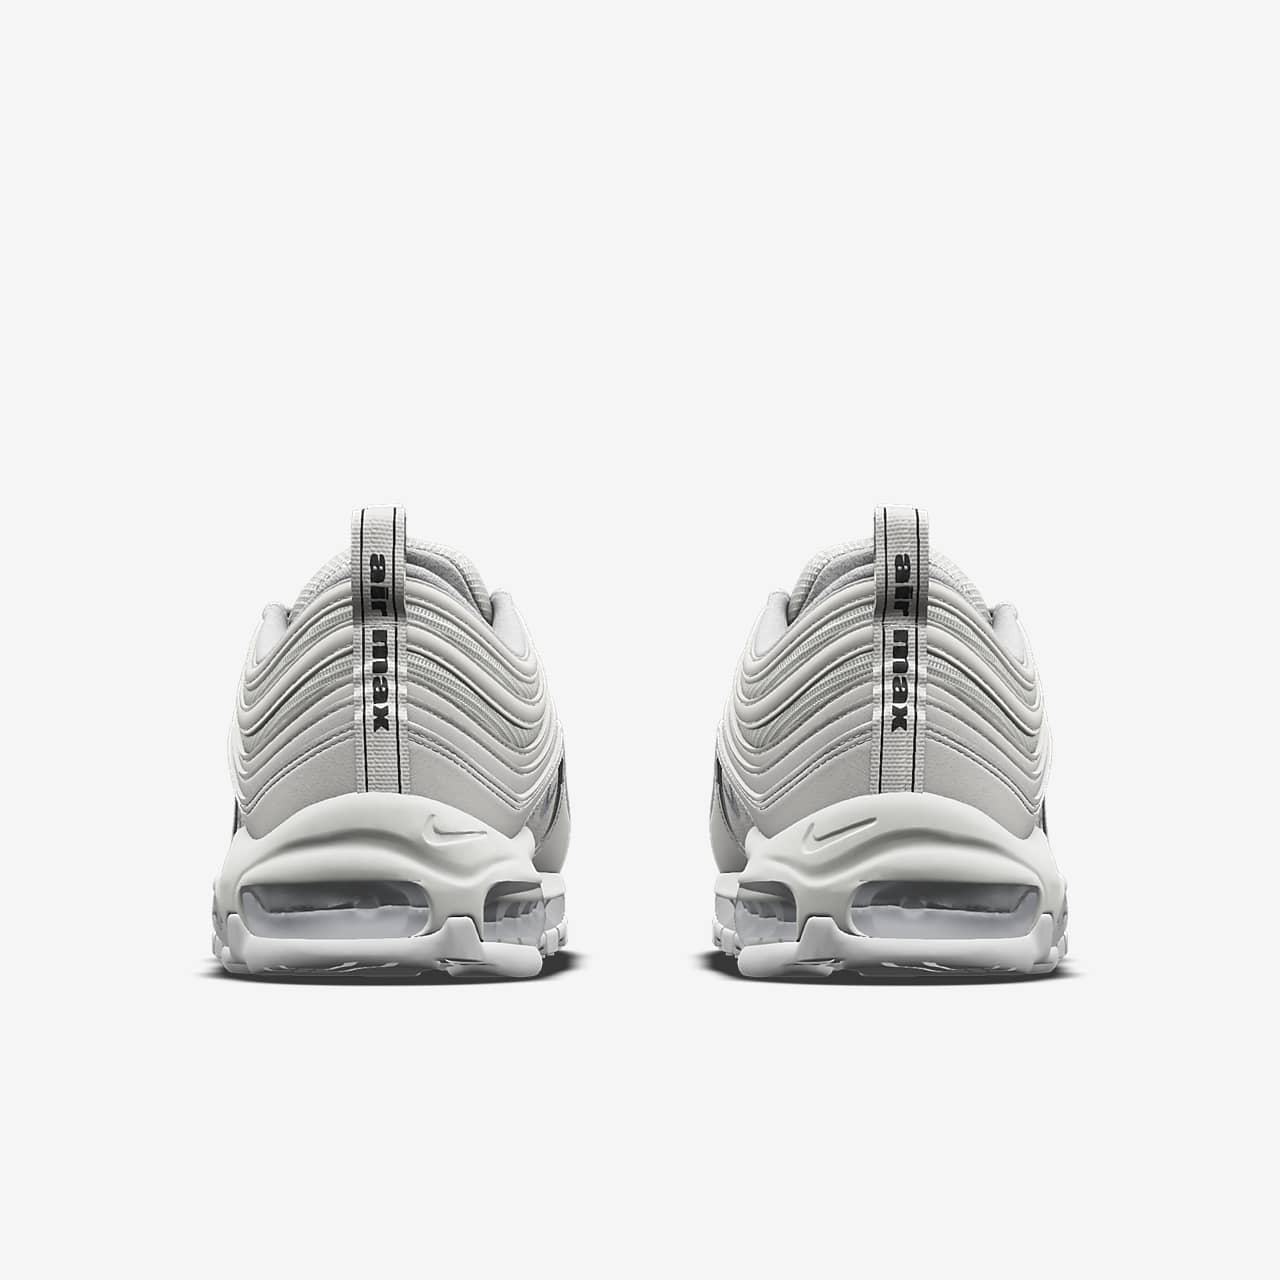 The Nike Air Max 97 Is Now Available On Nike By You •